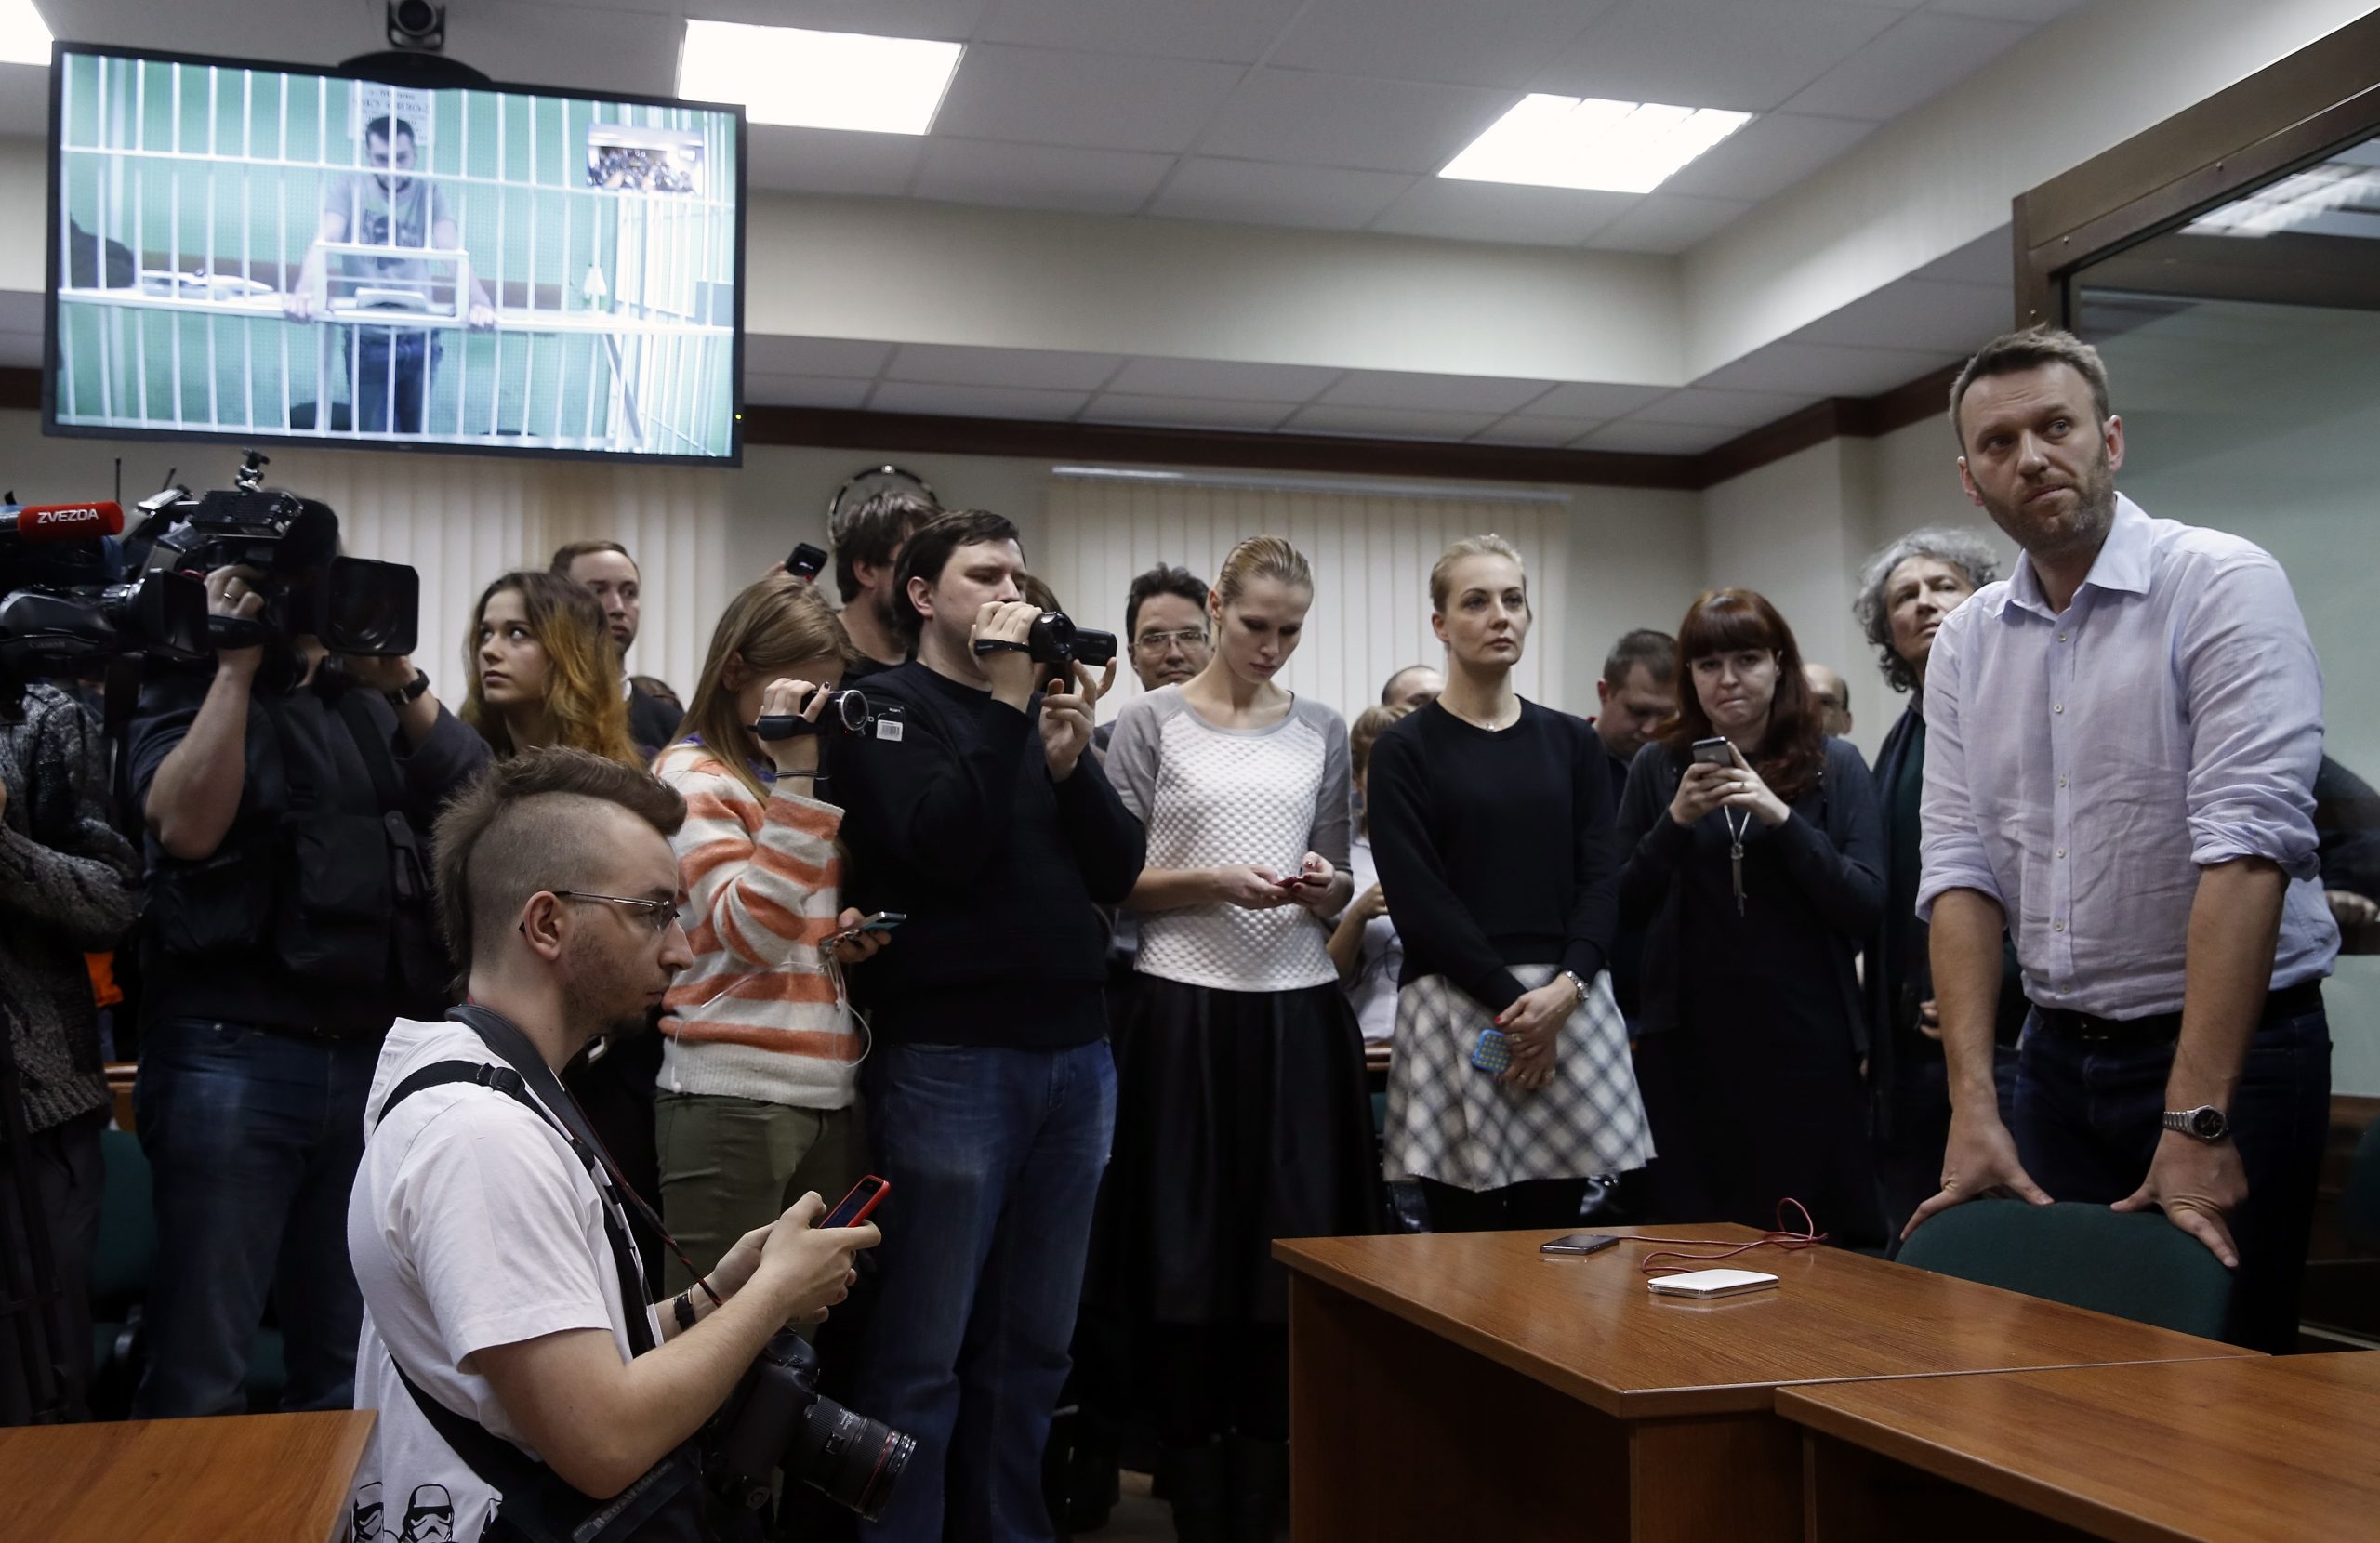 epa08983789 (FILE) - Anti-corruption blogger and liberal opposition leader Alexei Navalny (R) and his jailed brother Oleg, screened from a prison await to a verdict in a court room of the Moscow City Court in Moscow, Russia, 17 February 2015 (reissued 03 February 2021). Navalny was sentenced to 3.5 years in a penal colony for the violation of probation terms of a suspended sentence he had received for a 2014 money laundering case.  EPA/SERGEI CHIRIKOV *** Local Caption *** 51803359